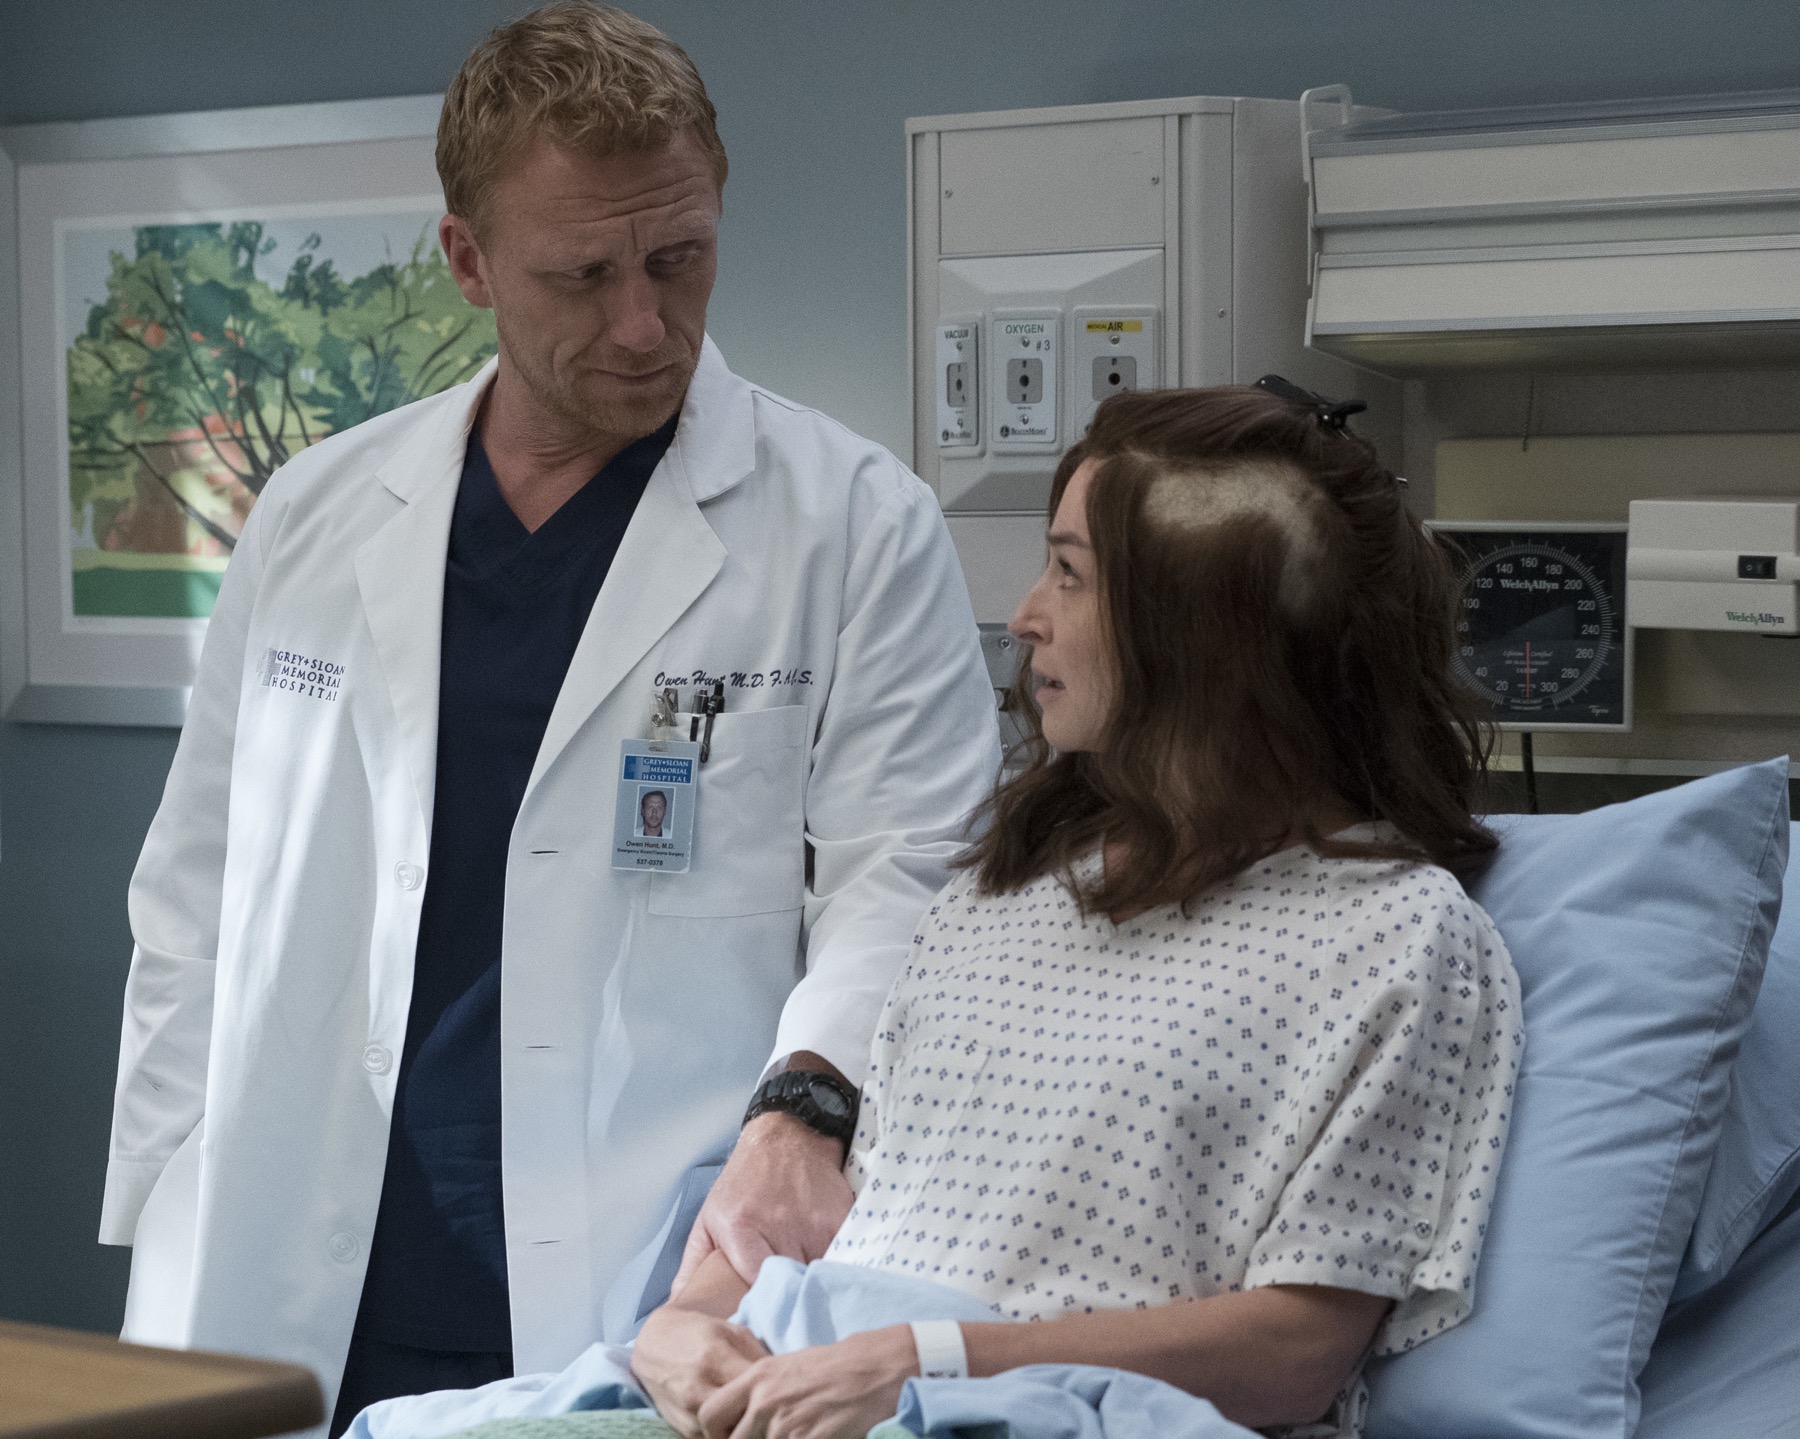 GREY'S ANATOMY 14.04 "Ain't That a Kick in the Head" Photos - Grey's Anatomy Ain't That A Kick In The Head